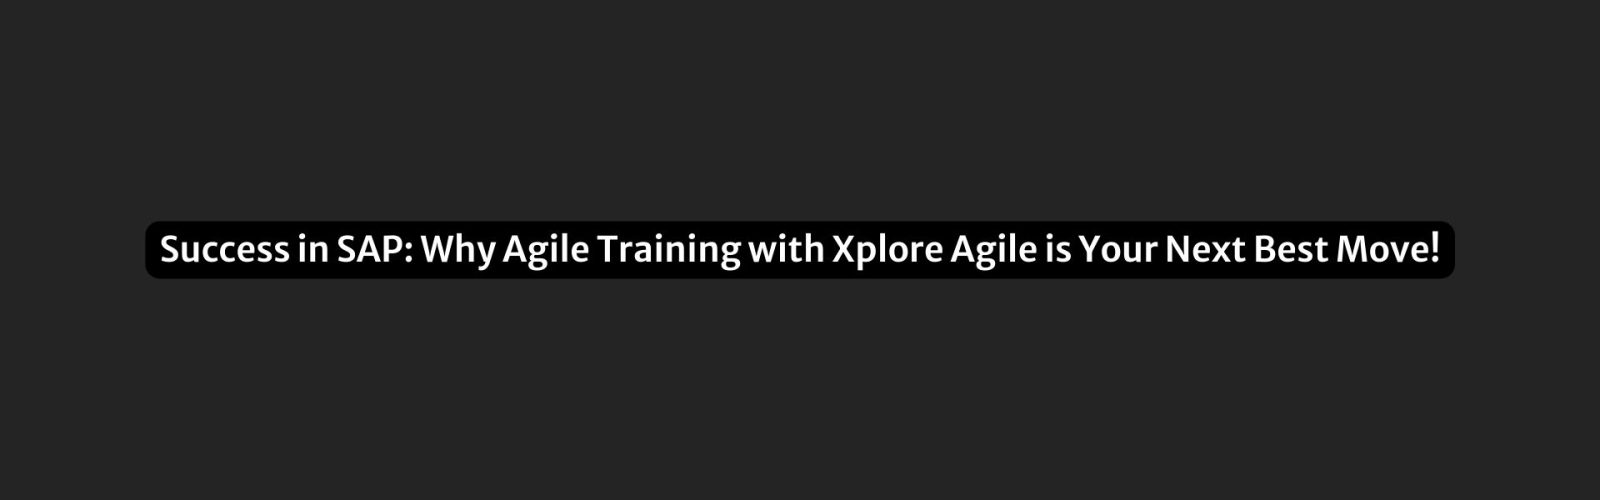 Success in SAP Why Agile Training with Xplore Agile is Your Next Best Move!